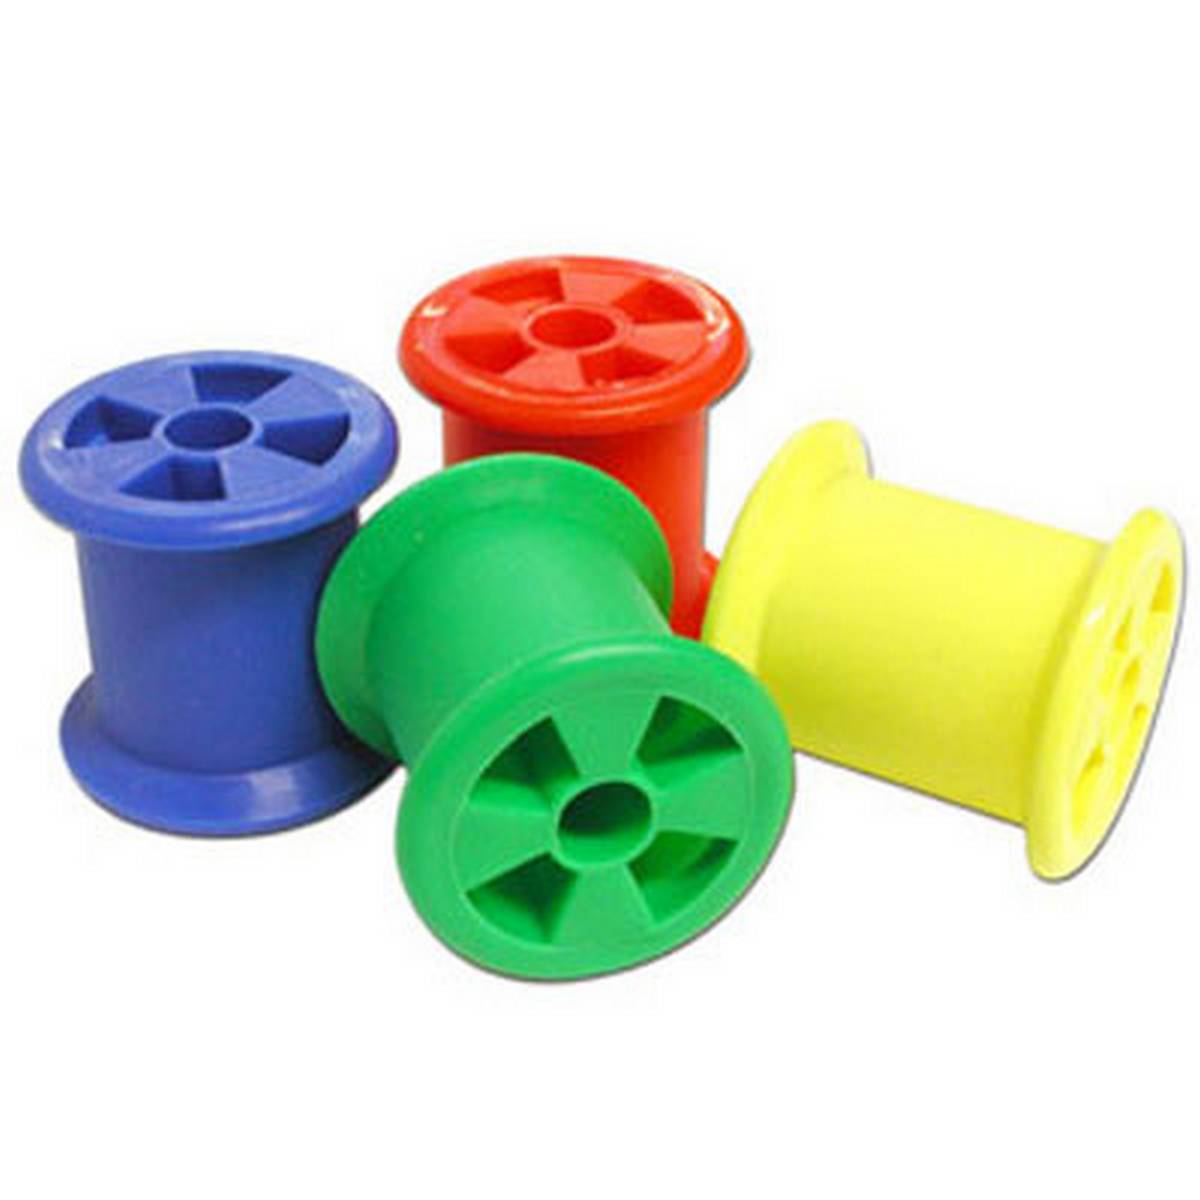 CleverCo Cotton Reels Value Tub of 122